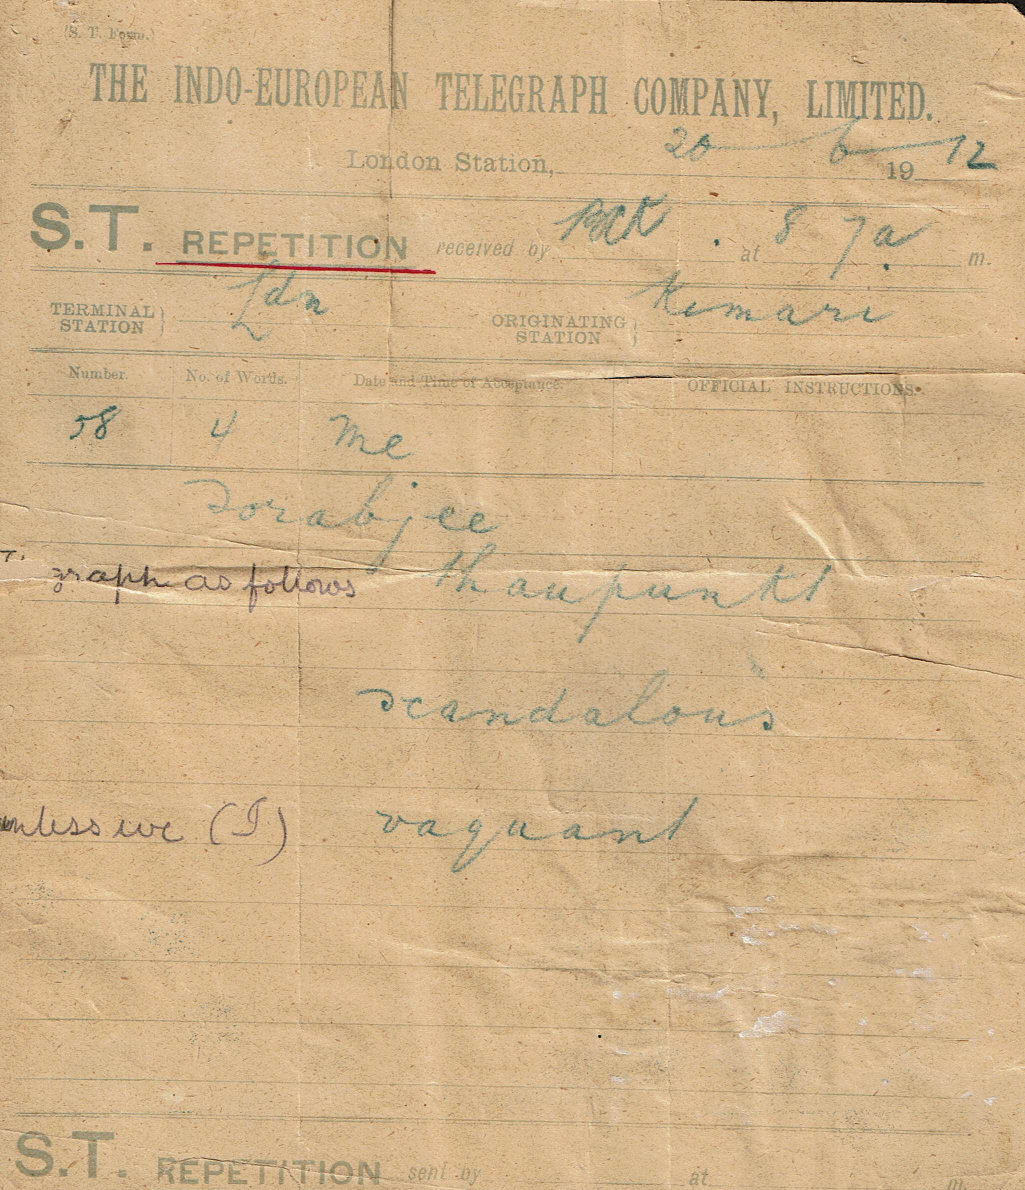 Indo Telegram Co. S.T. Repetition Form, London 1912